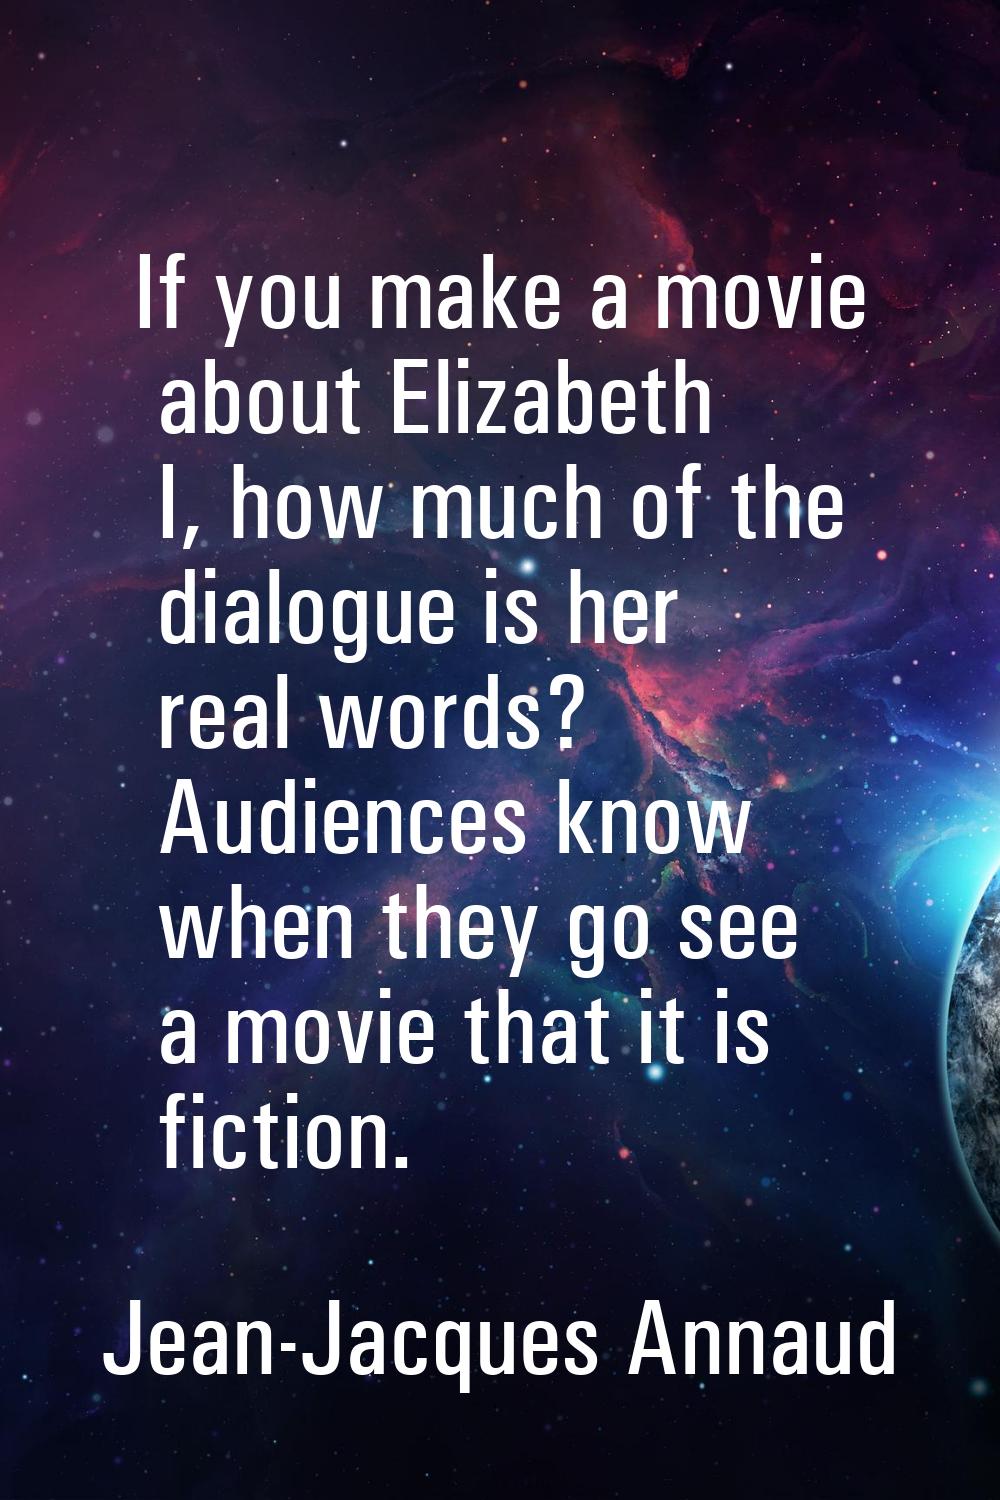 If you make a movie about Elizabeth I, how much of the dialogue is her real words? Audiences know w